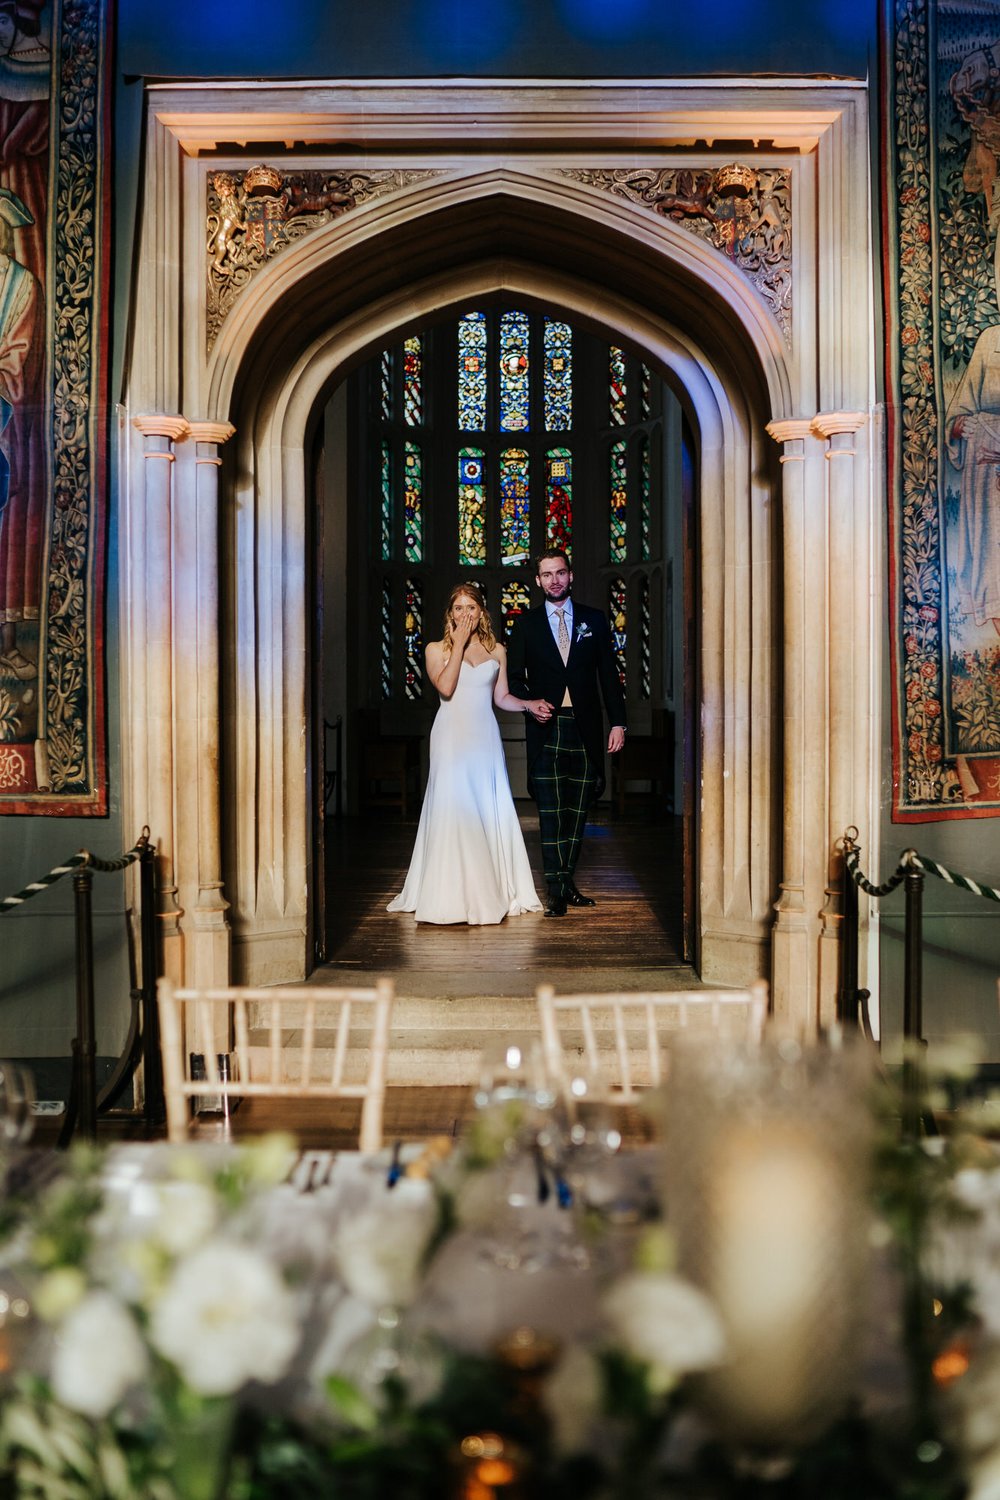 Bride and groom are both in awe as they see the decoration inside Hampton Court Palace's Great Hall for the very first time